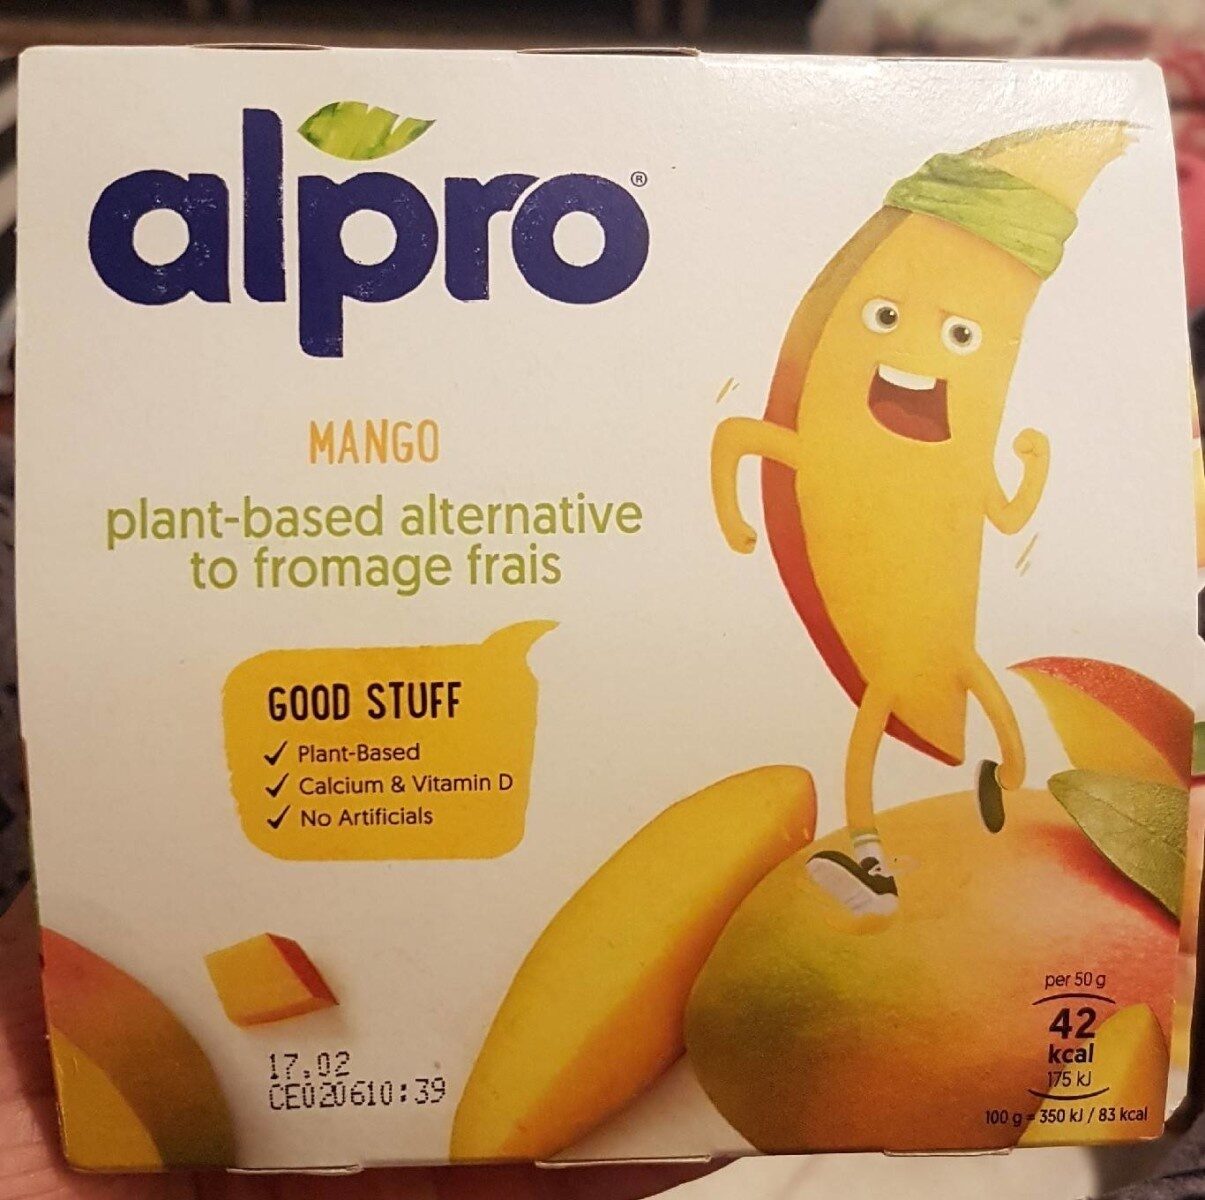 Mango plant-based alternative to fromage frais - Product - en